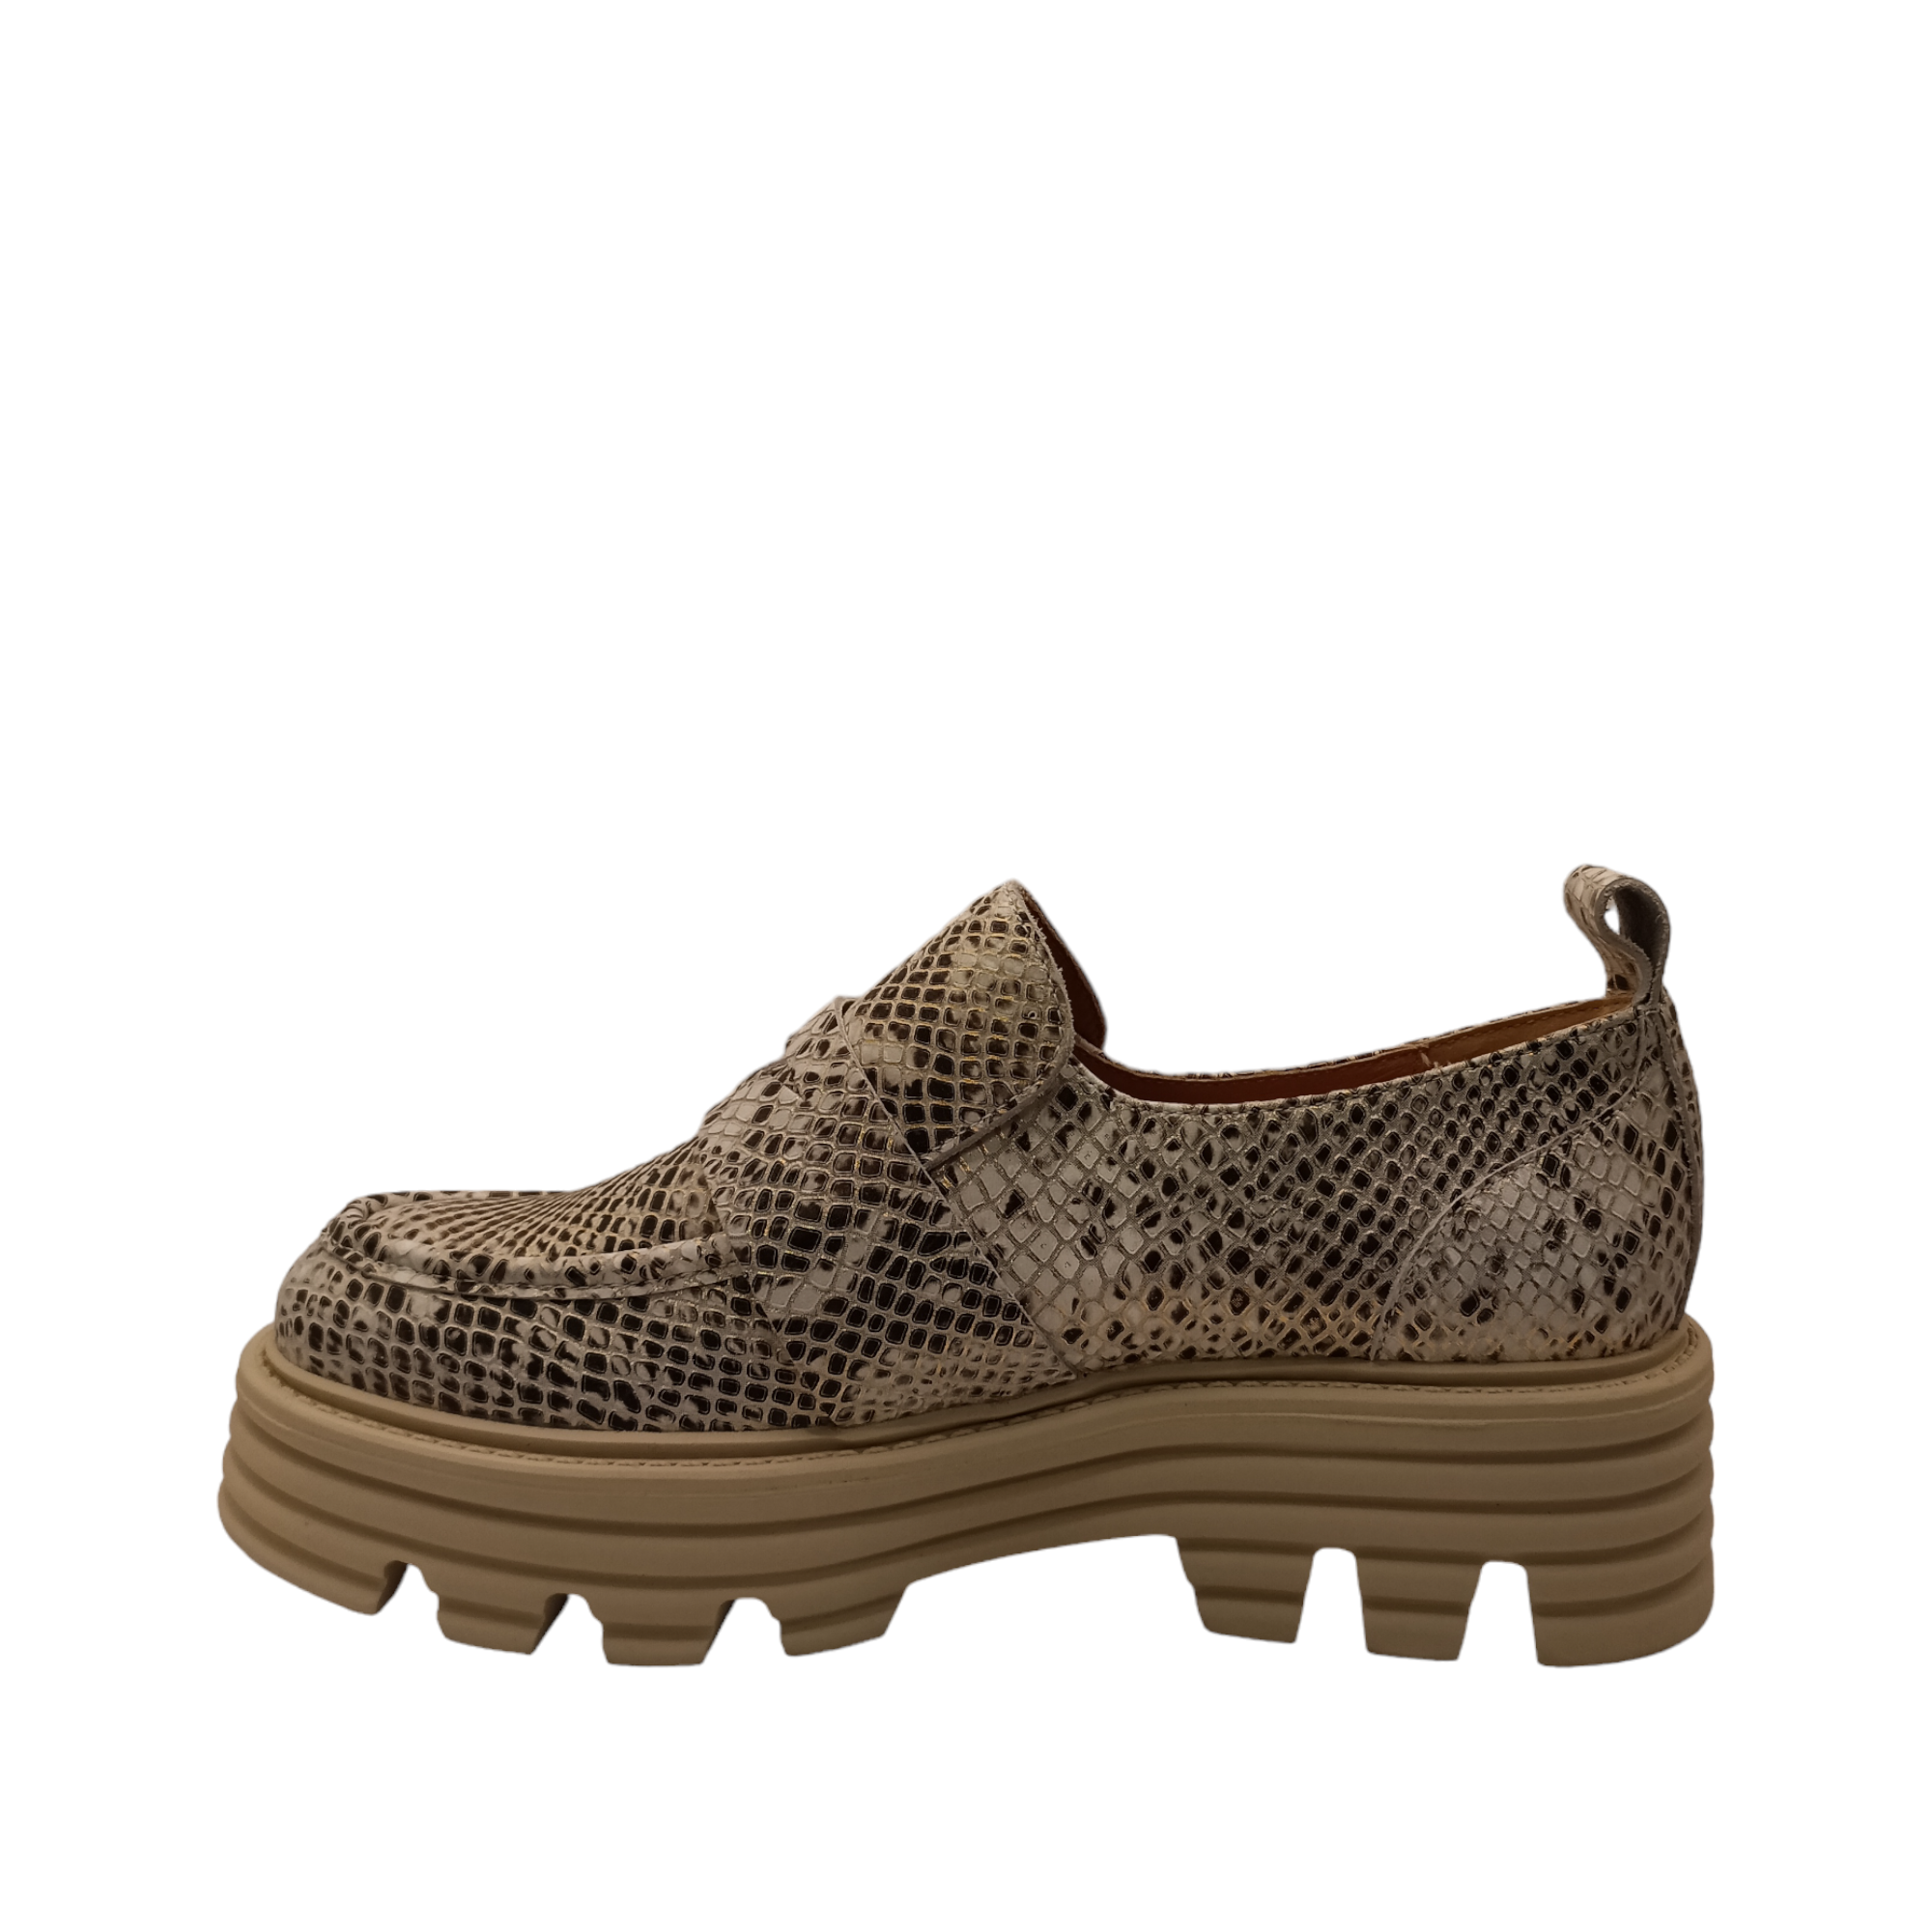 Side angle view of Jania, Slip on shoe from EOS. Champagne Snake pattern with a bone coloured platform. small heel loop and elastic gusset under the tongue upper. Shop WOmens Shoes ONline and IN-store with shoe&me Mount Maunganui Tauranga.